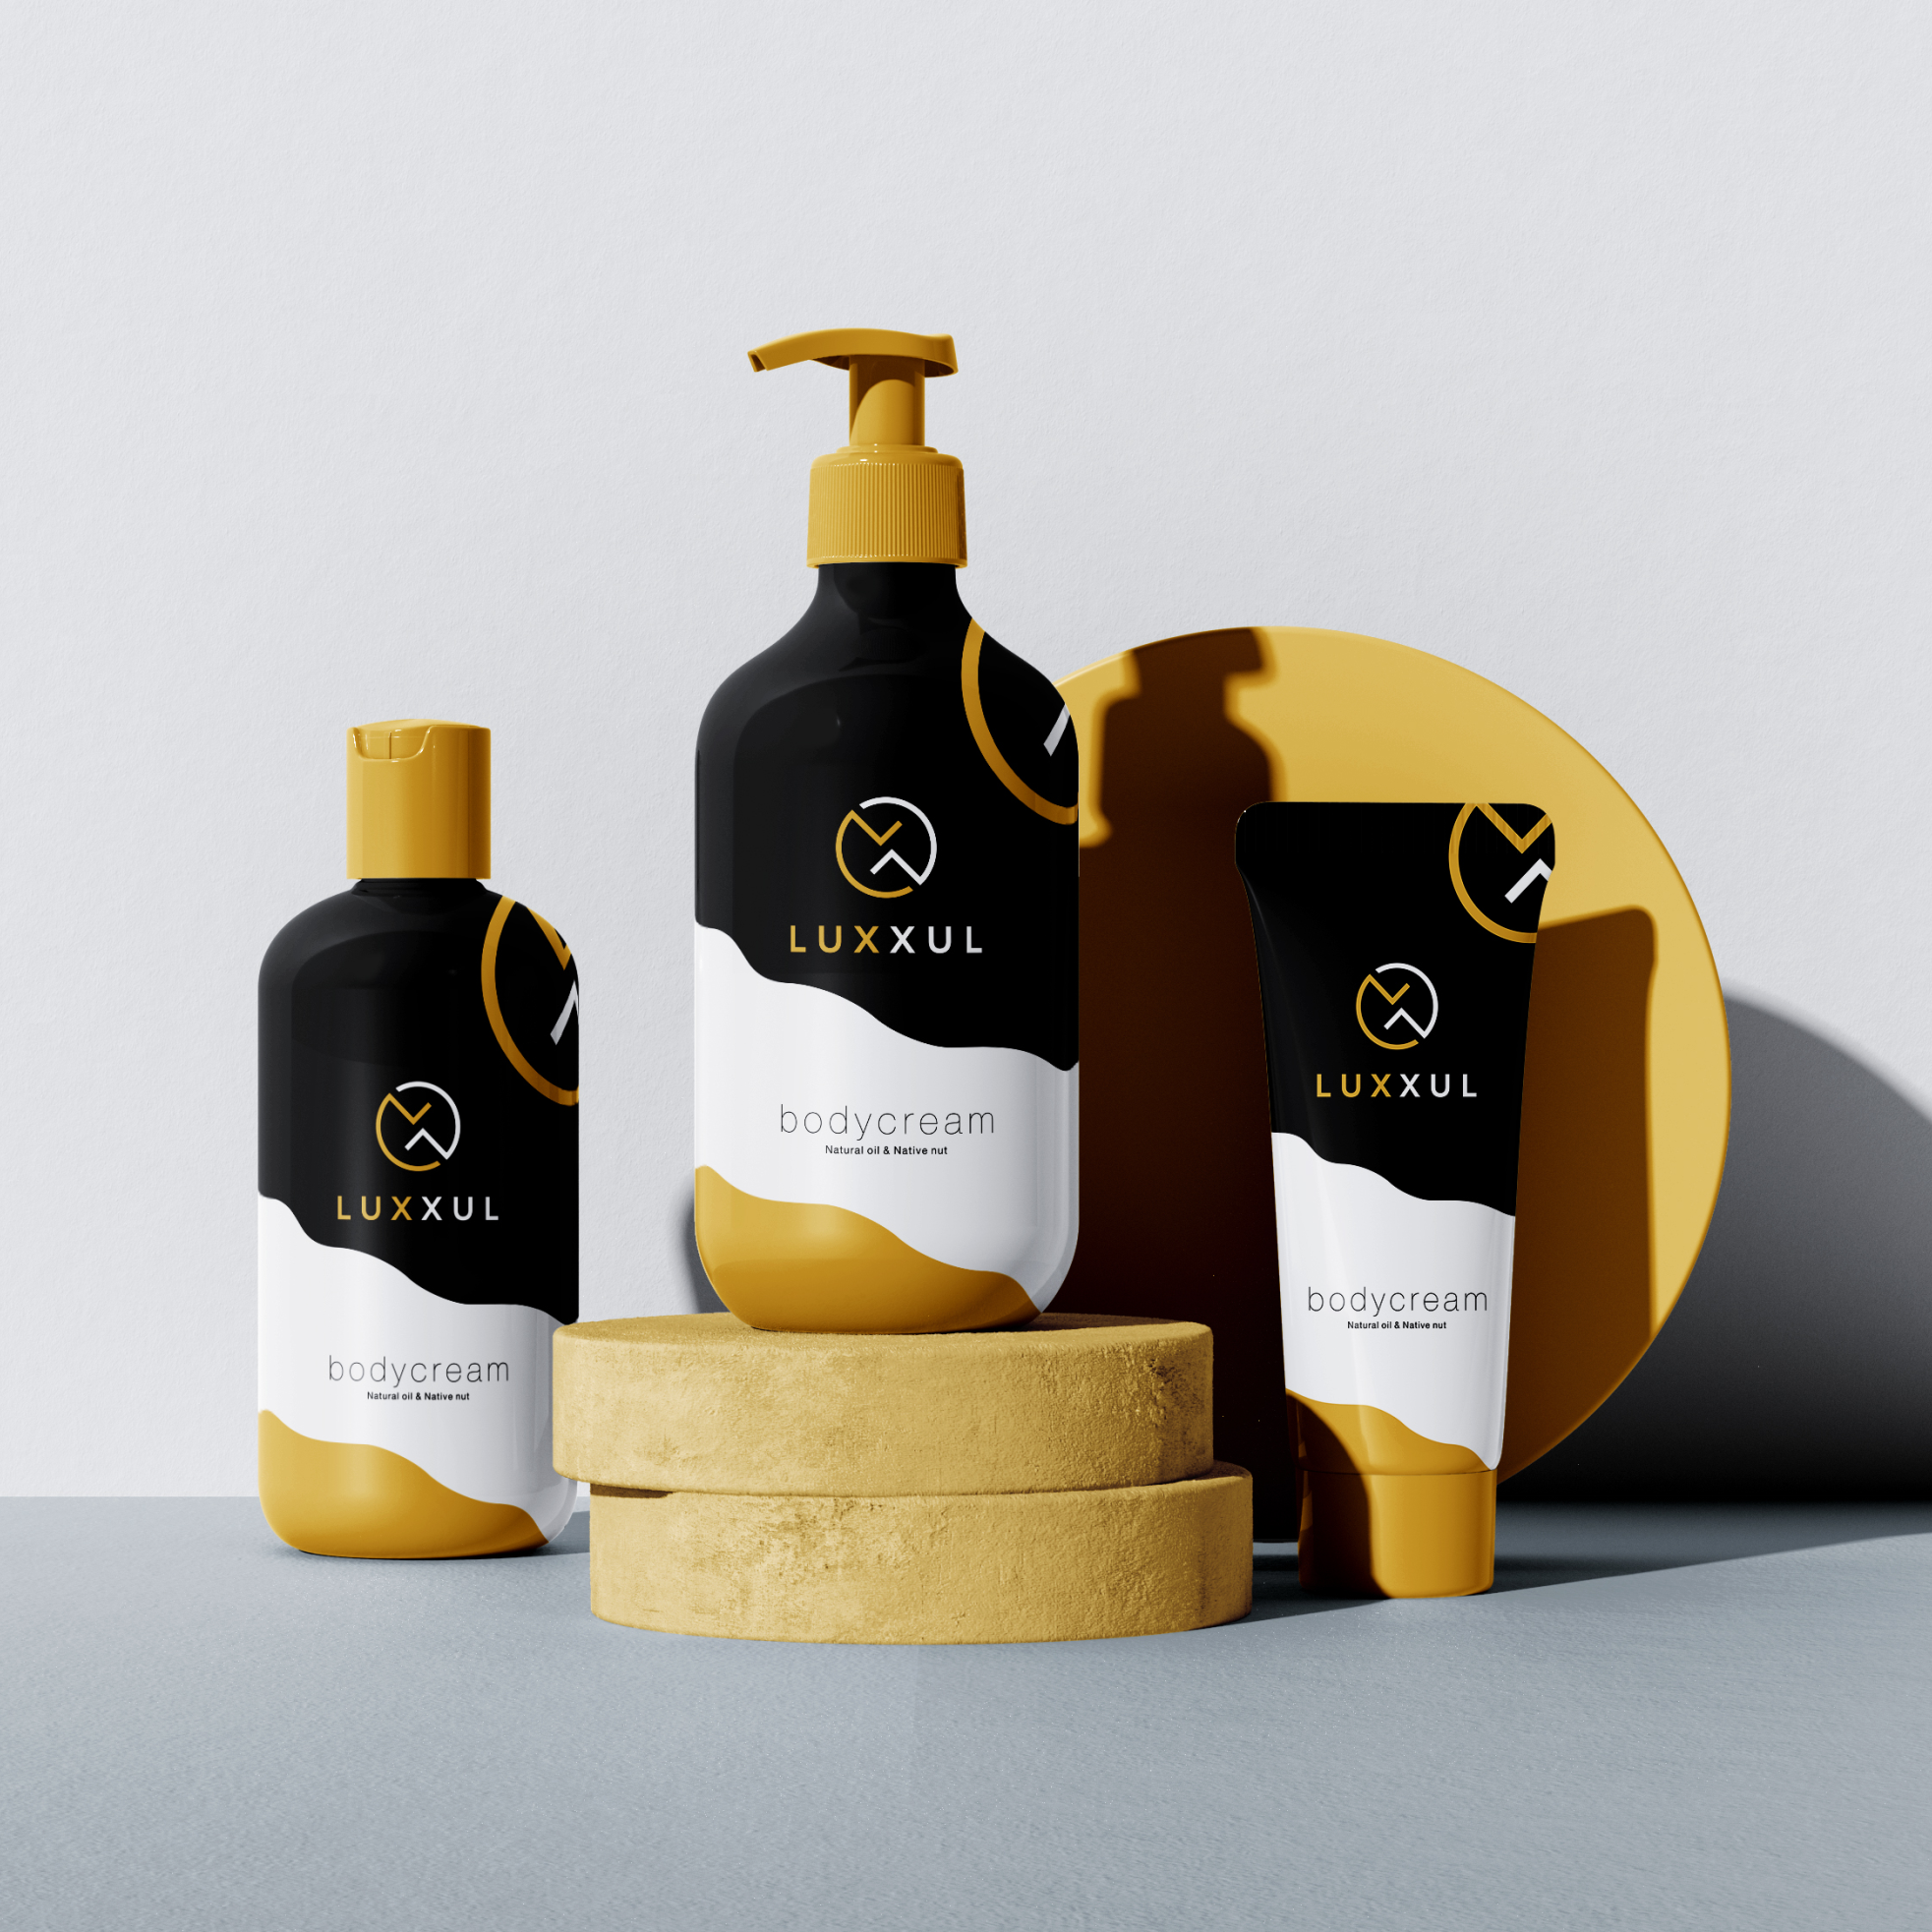 Packaging Design #219 | 'Luxxul Skin and Hair Care Products' design project  | DesignContest ®